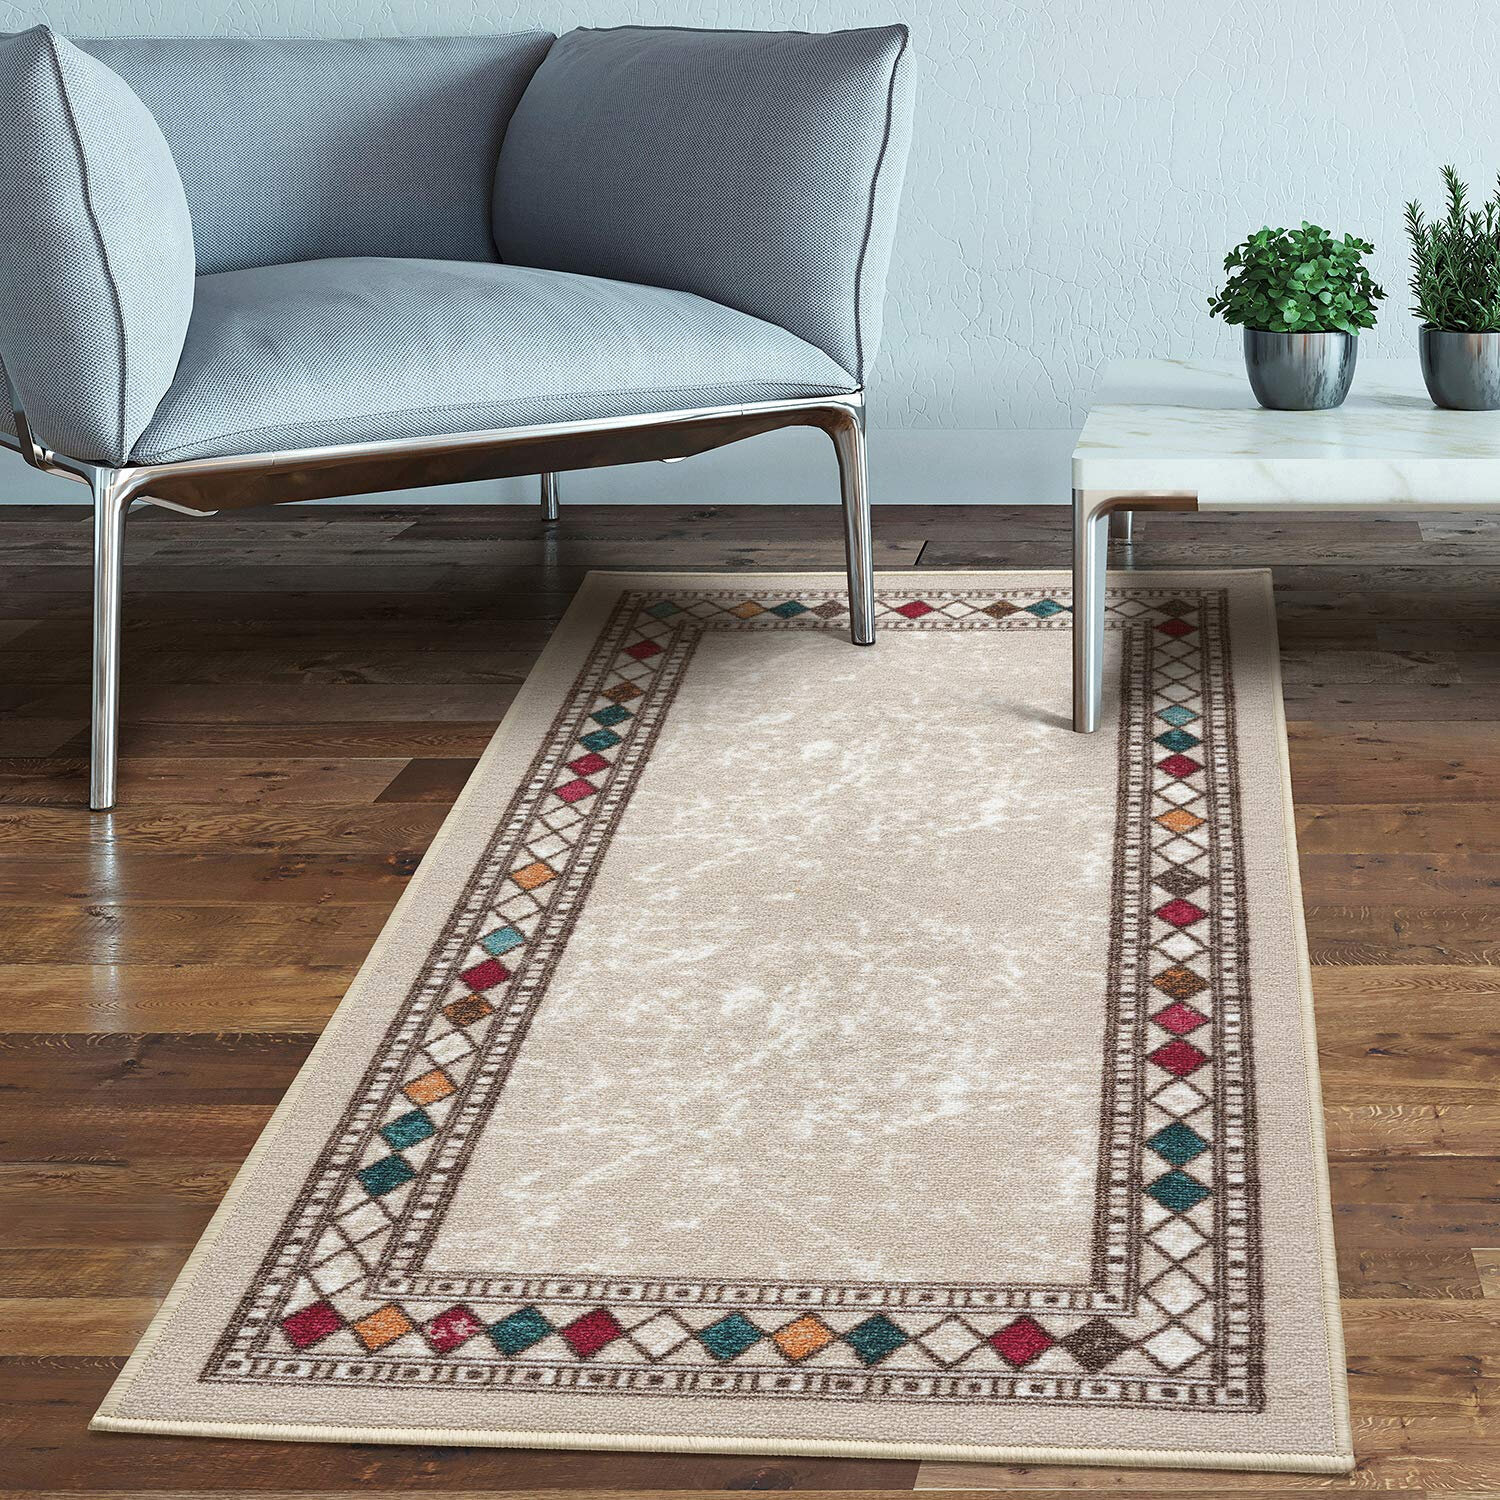 Antep Rugs Alfombras Bordered Modern 2x4 Non-Slip (Non-Skid) Low Pile Rubber Backing Kitchen Area Rug (Navy, 2'3 x 4')